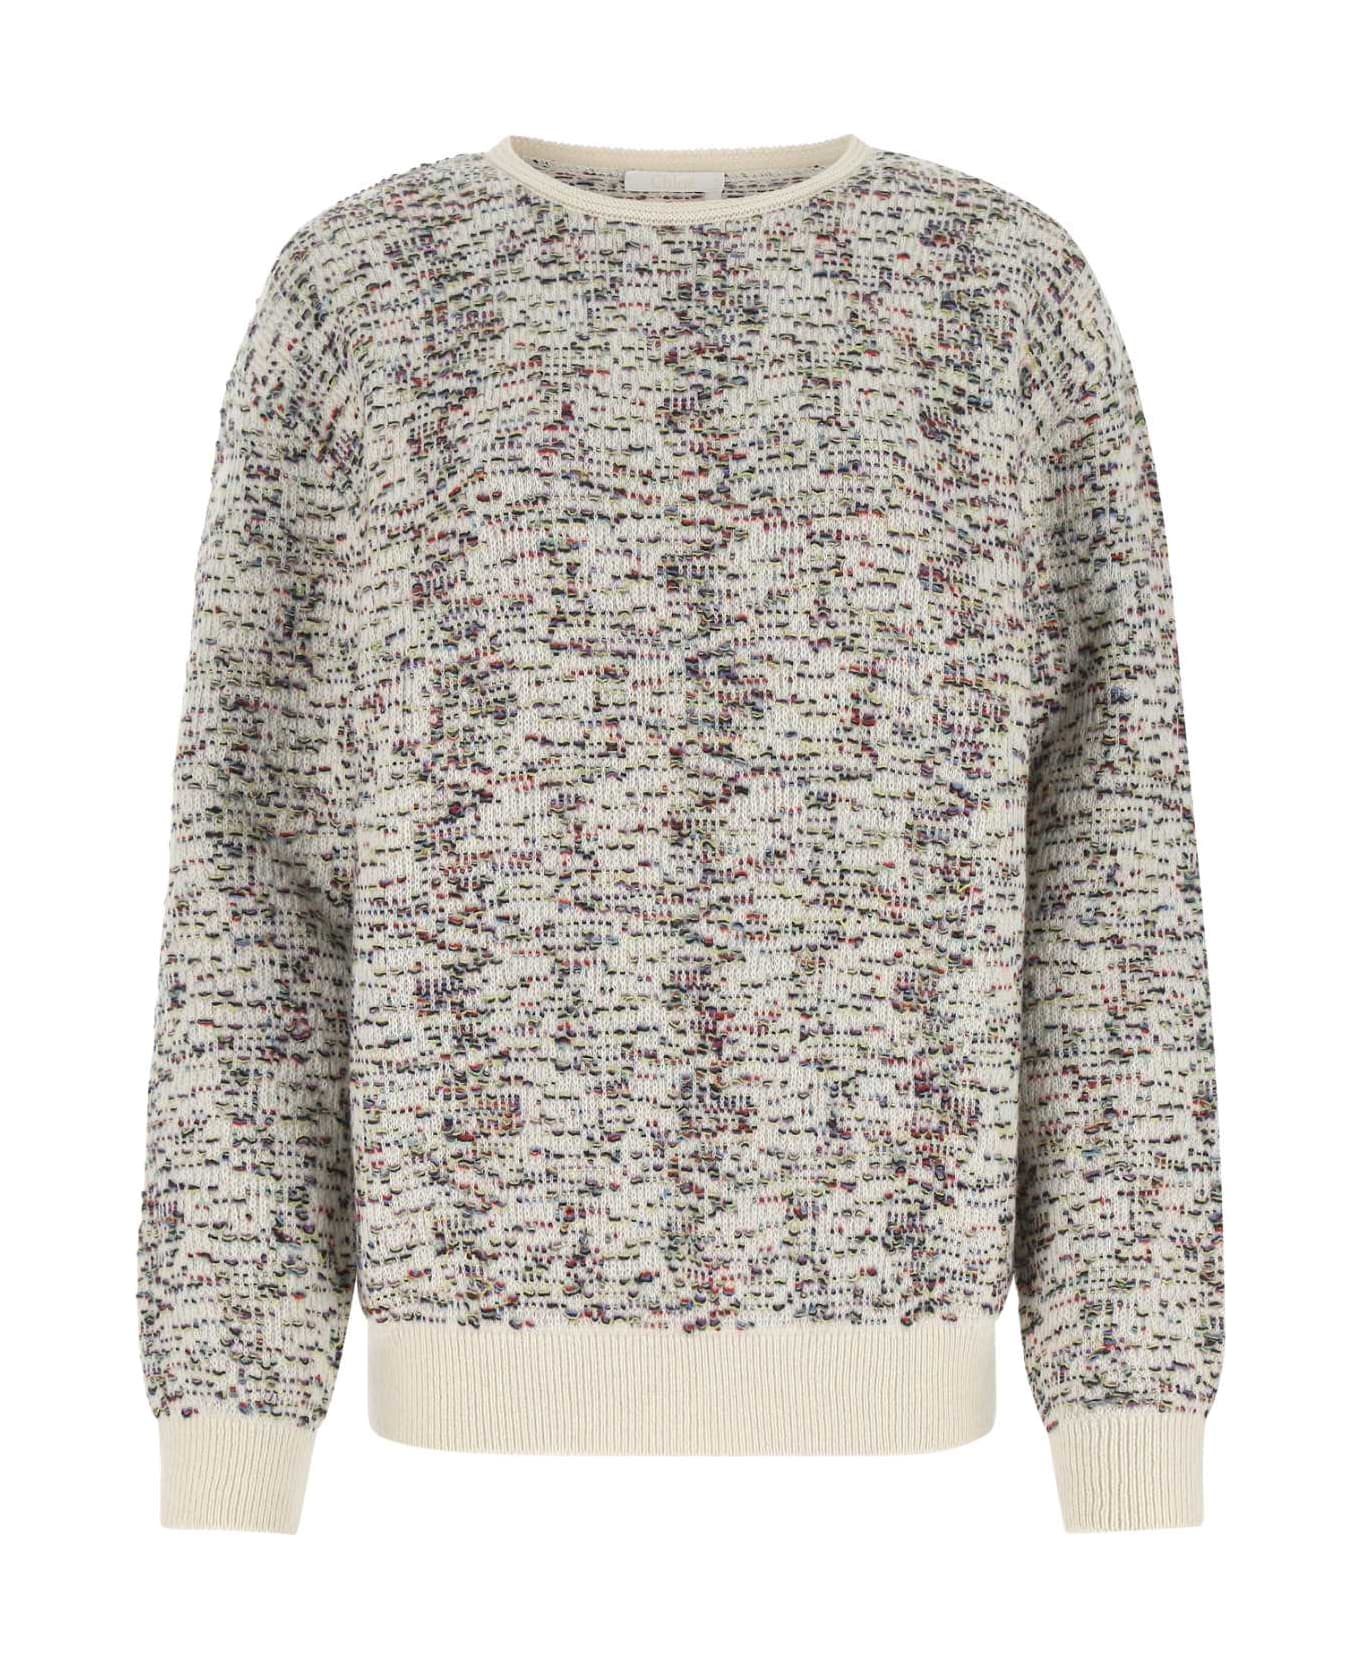 Chloé Embroidered Cashmere Blend Sweater - 116